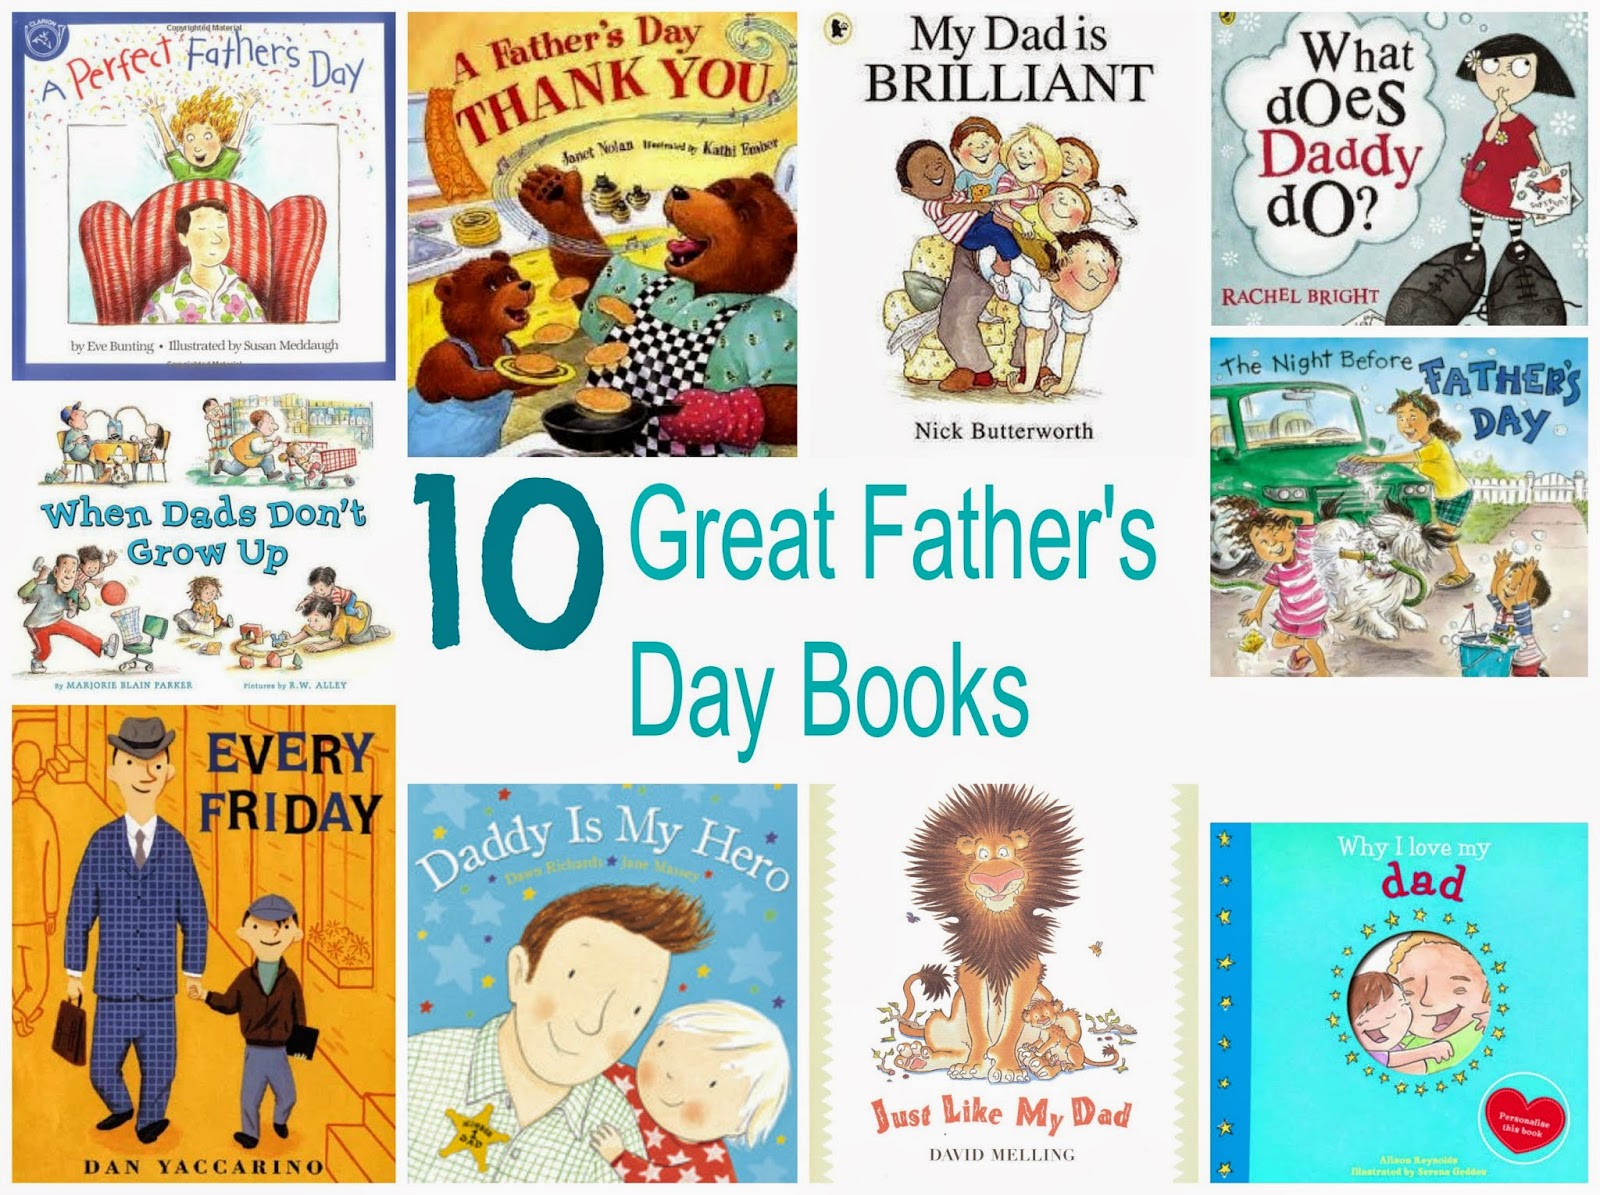 10 Fab Father's Day Books | Father day | books for daddys | dads books | gift ideas for fathers day | kids books for dads | fathers | dads |daddy } fathers day | gift |book club | books for kids | mamasVIB | blog | books | best books for dads | new dad | book ideas gifts 